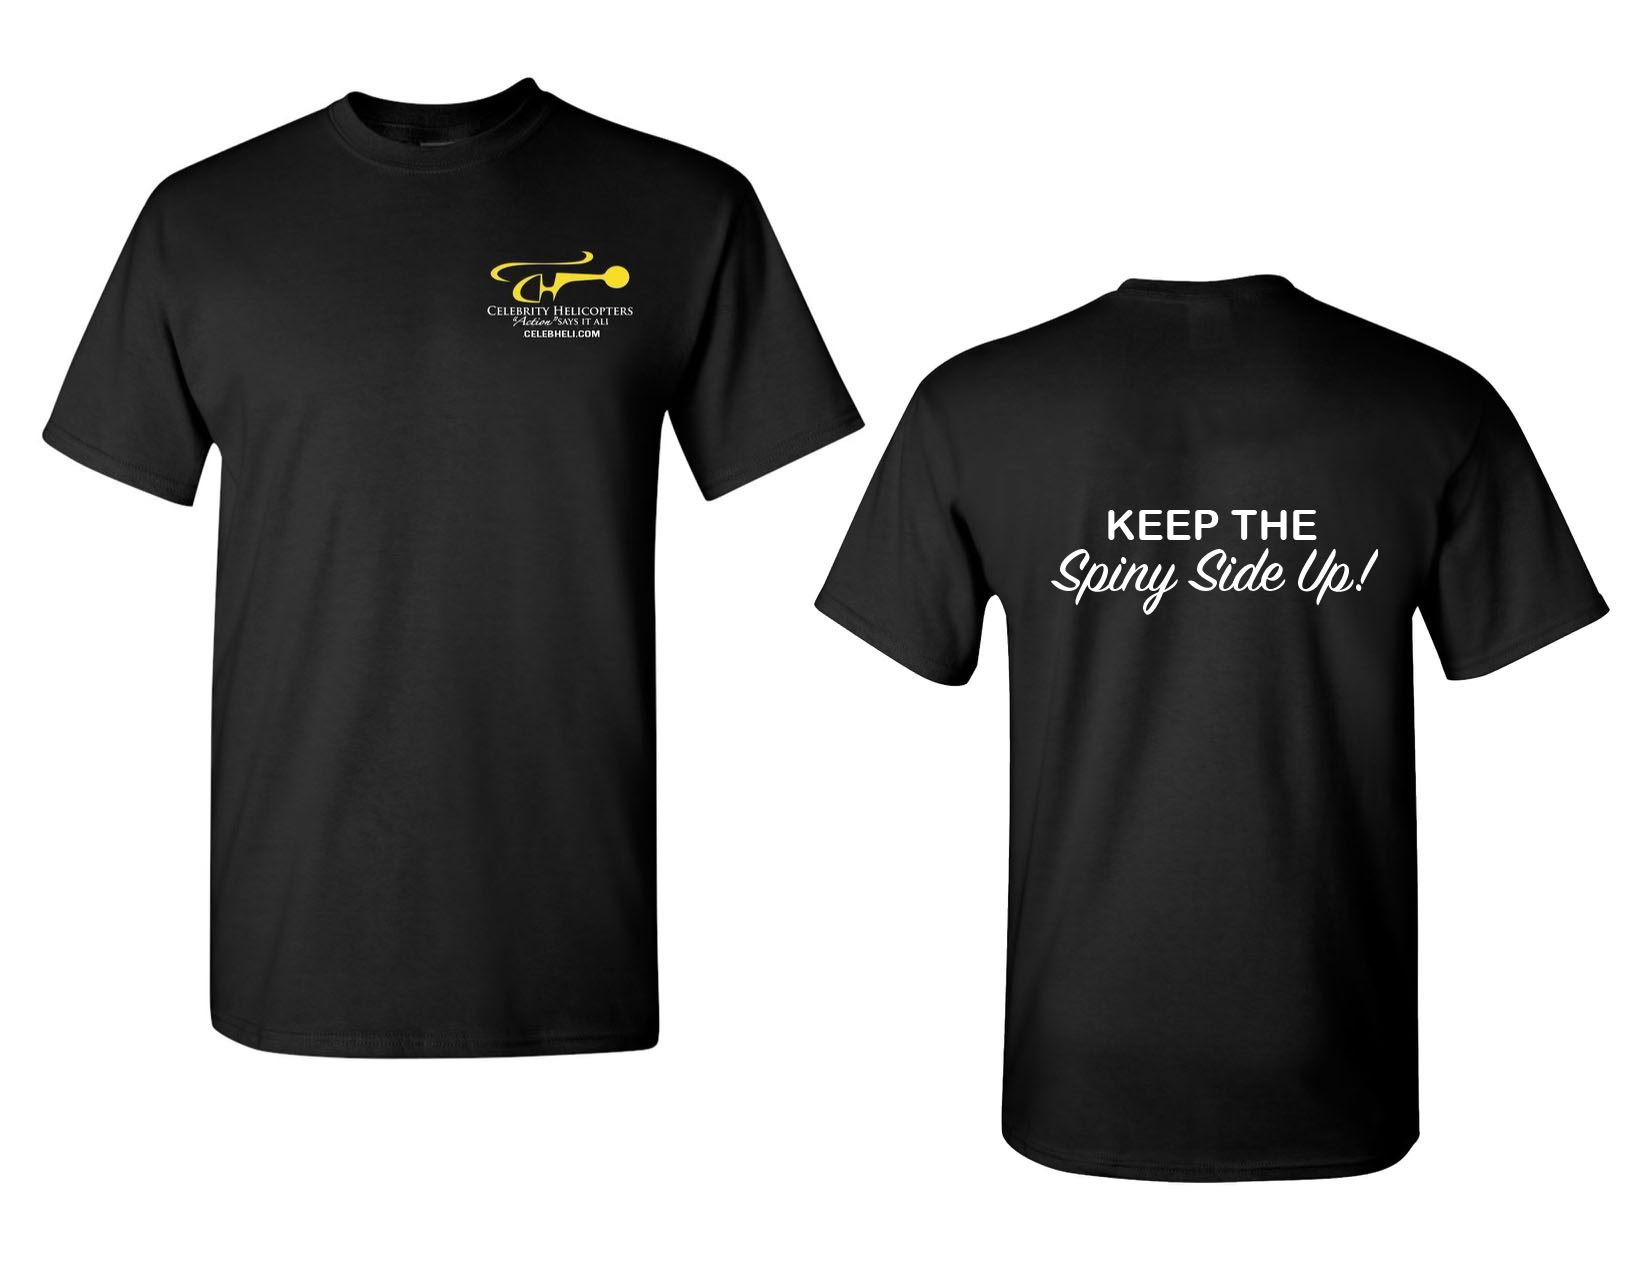 black t-shirt - keep the spiny side up